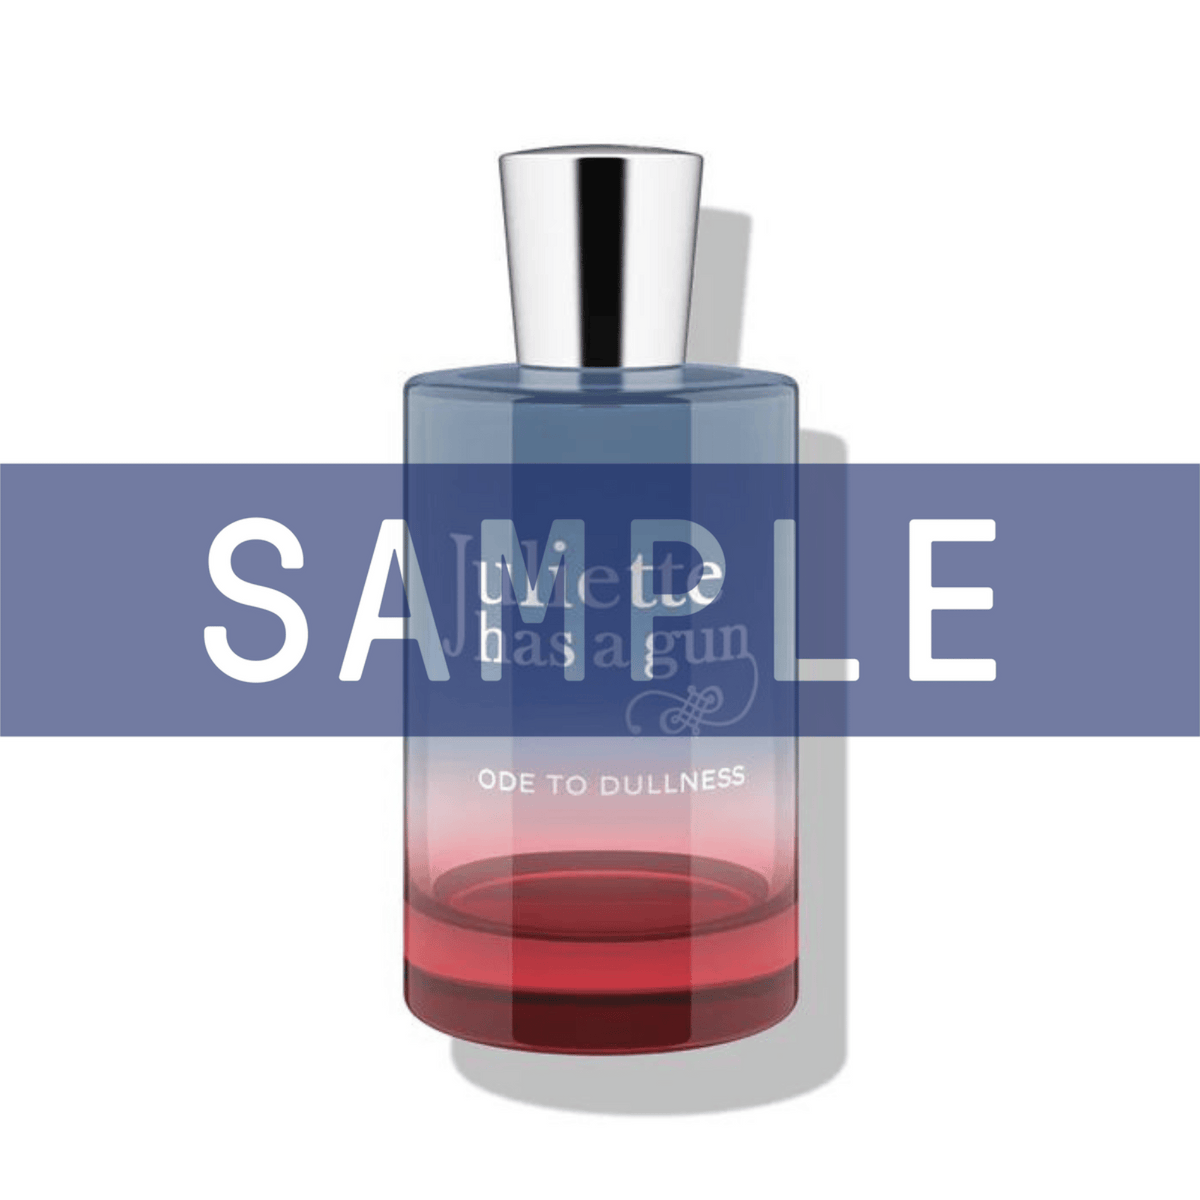 Primary Image of Sample - Ode To Dullness EDP